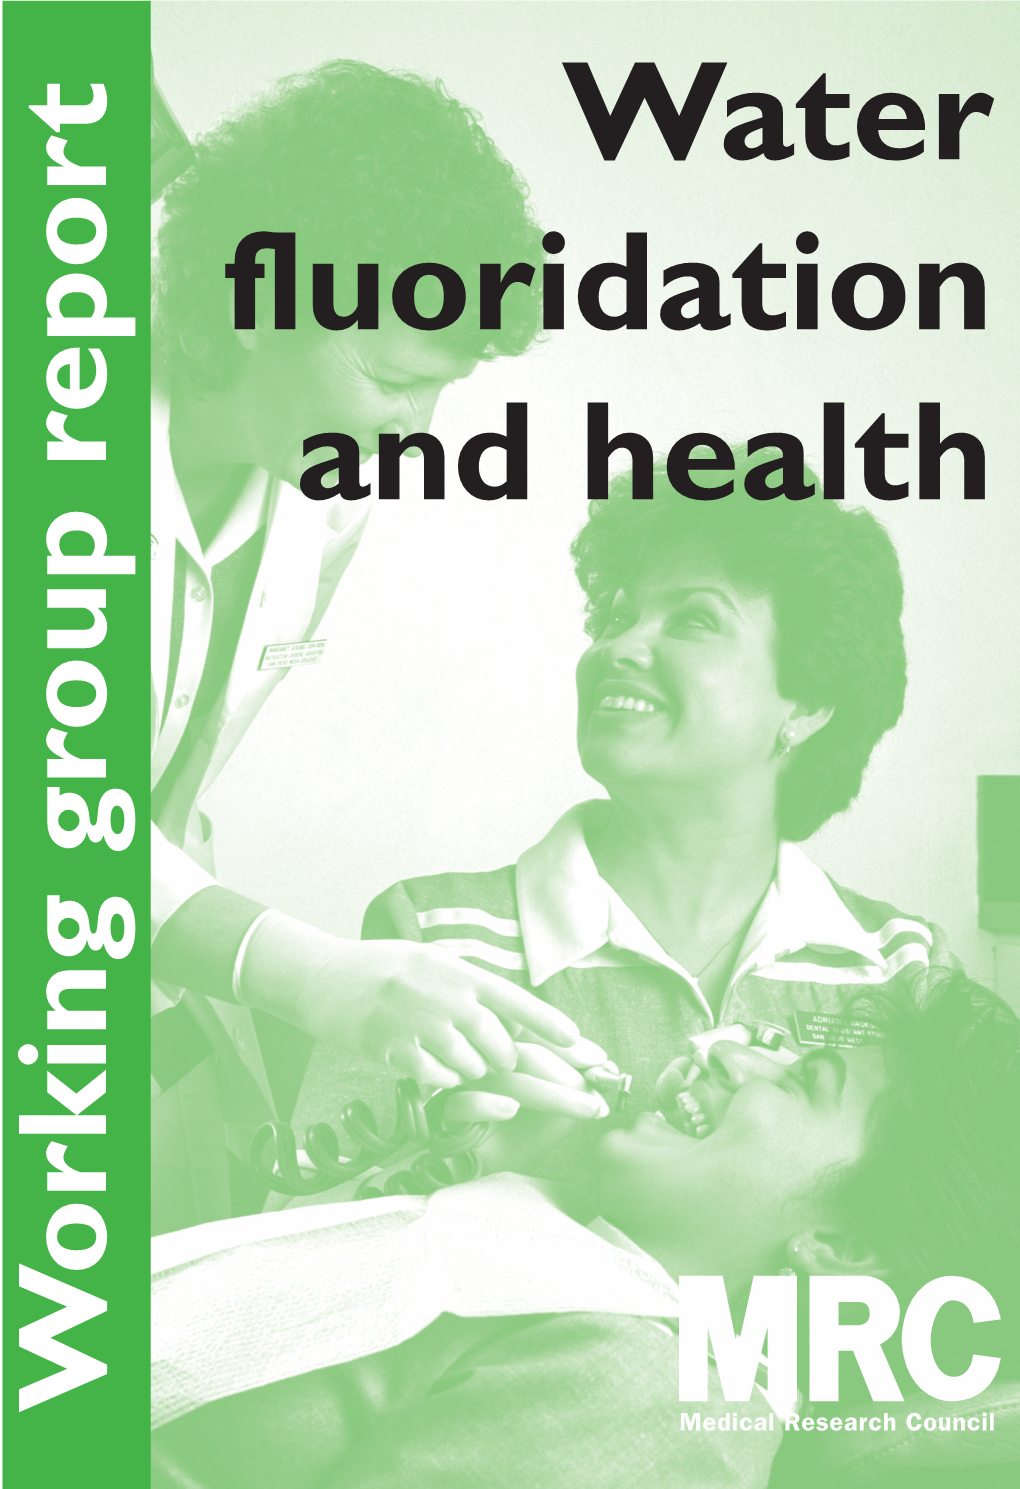 Water Fluoridation and Health